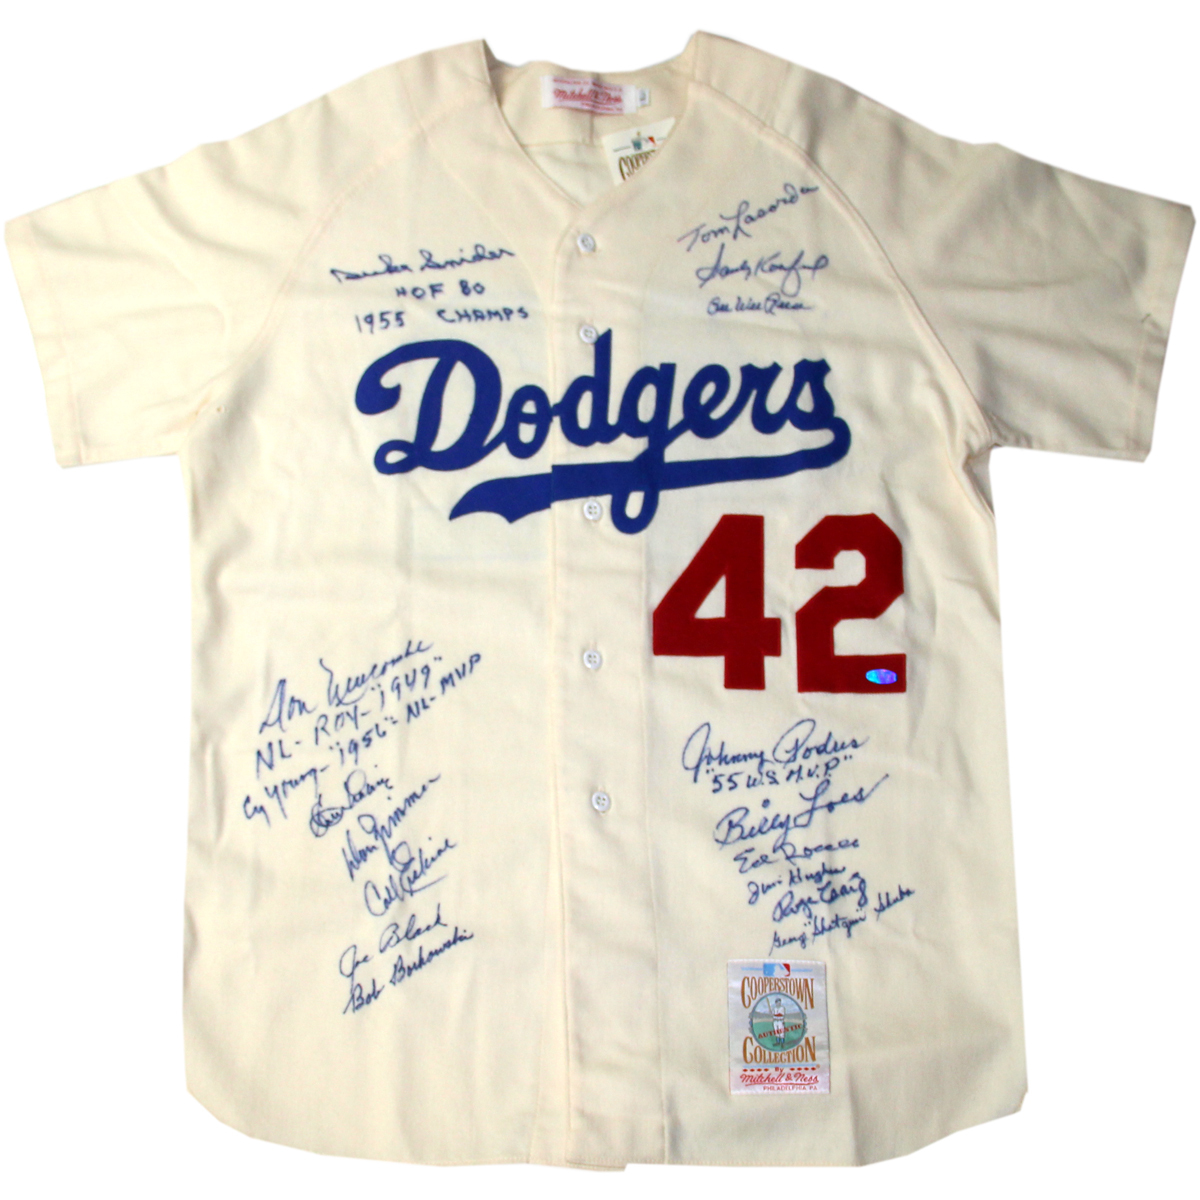 BROOKLYN DODGERS NO. 42 MULTI SIGNED JERSEY 16 SIGNATURES